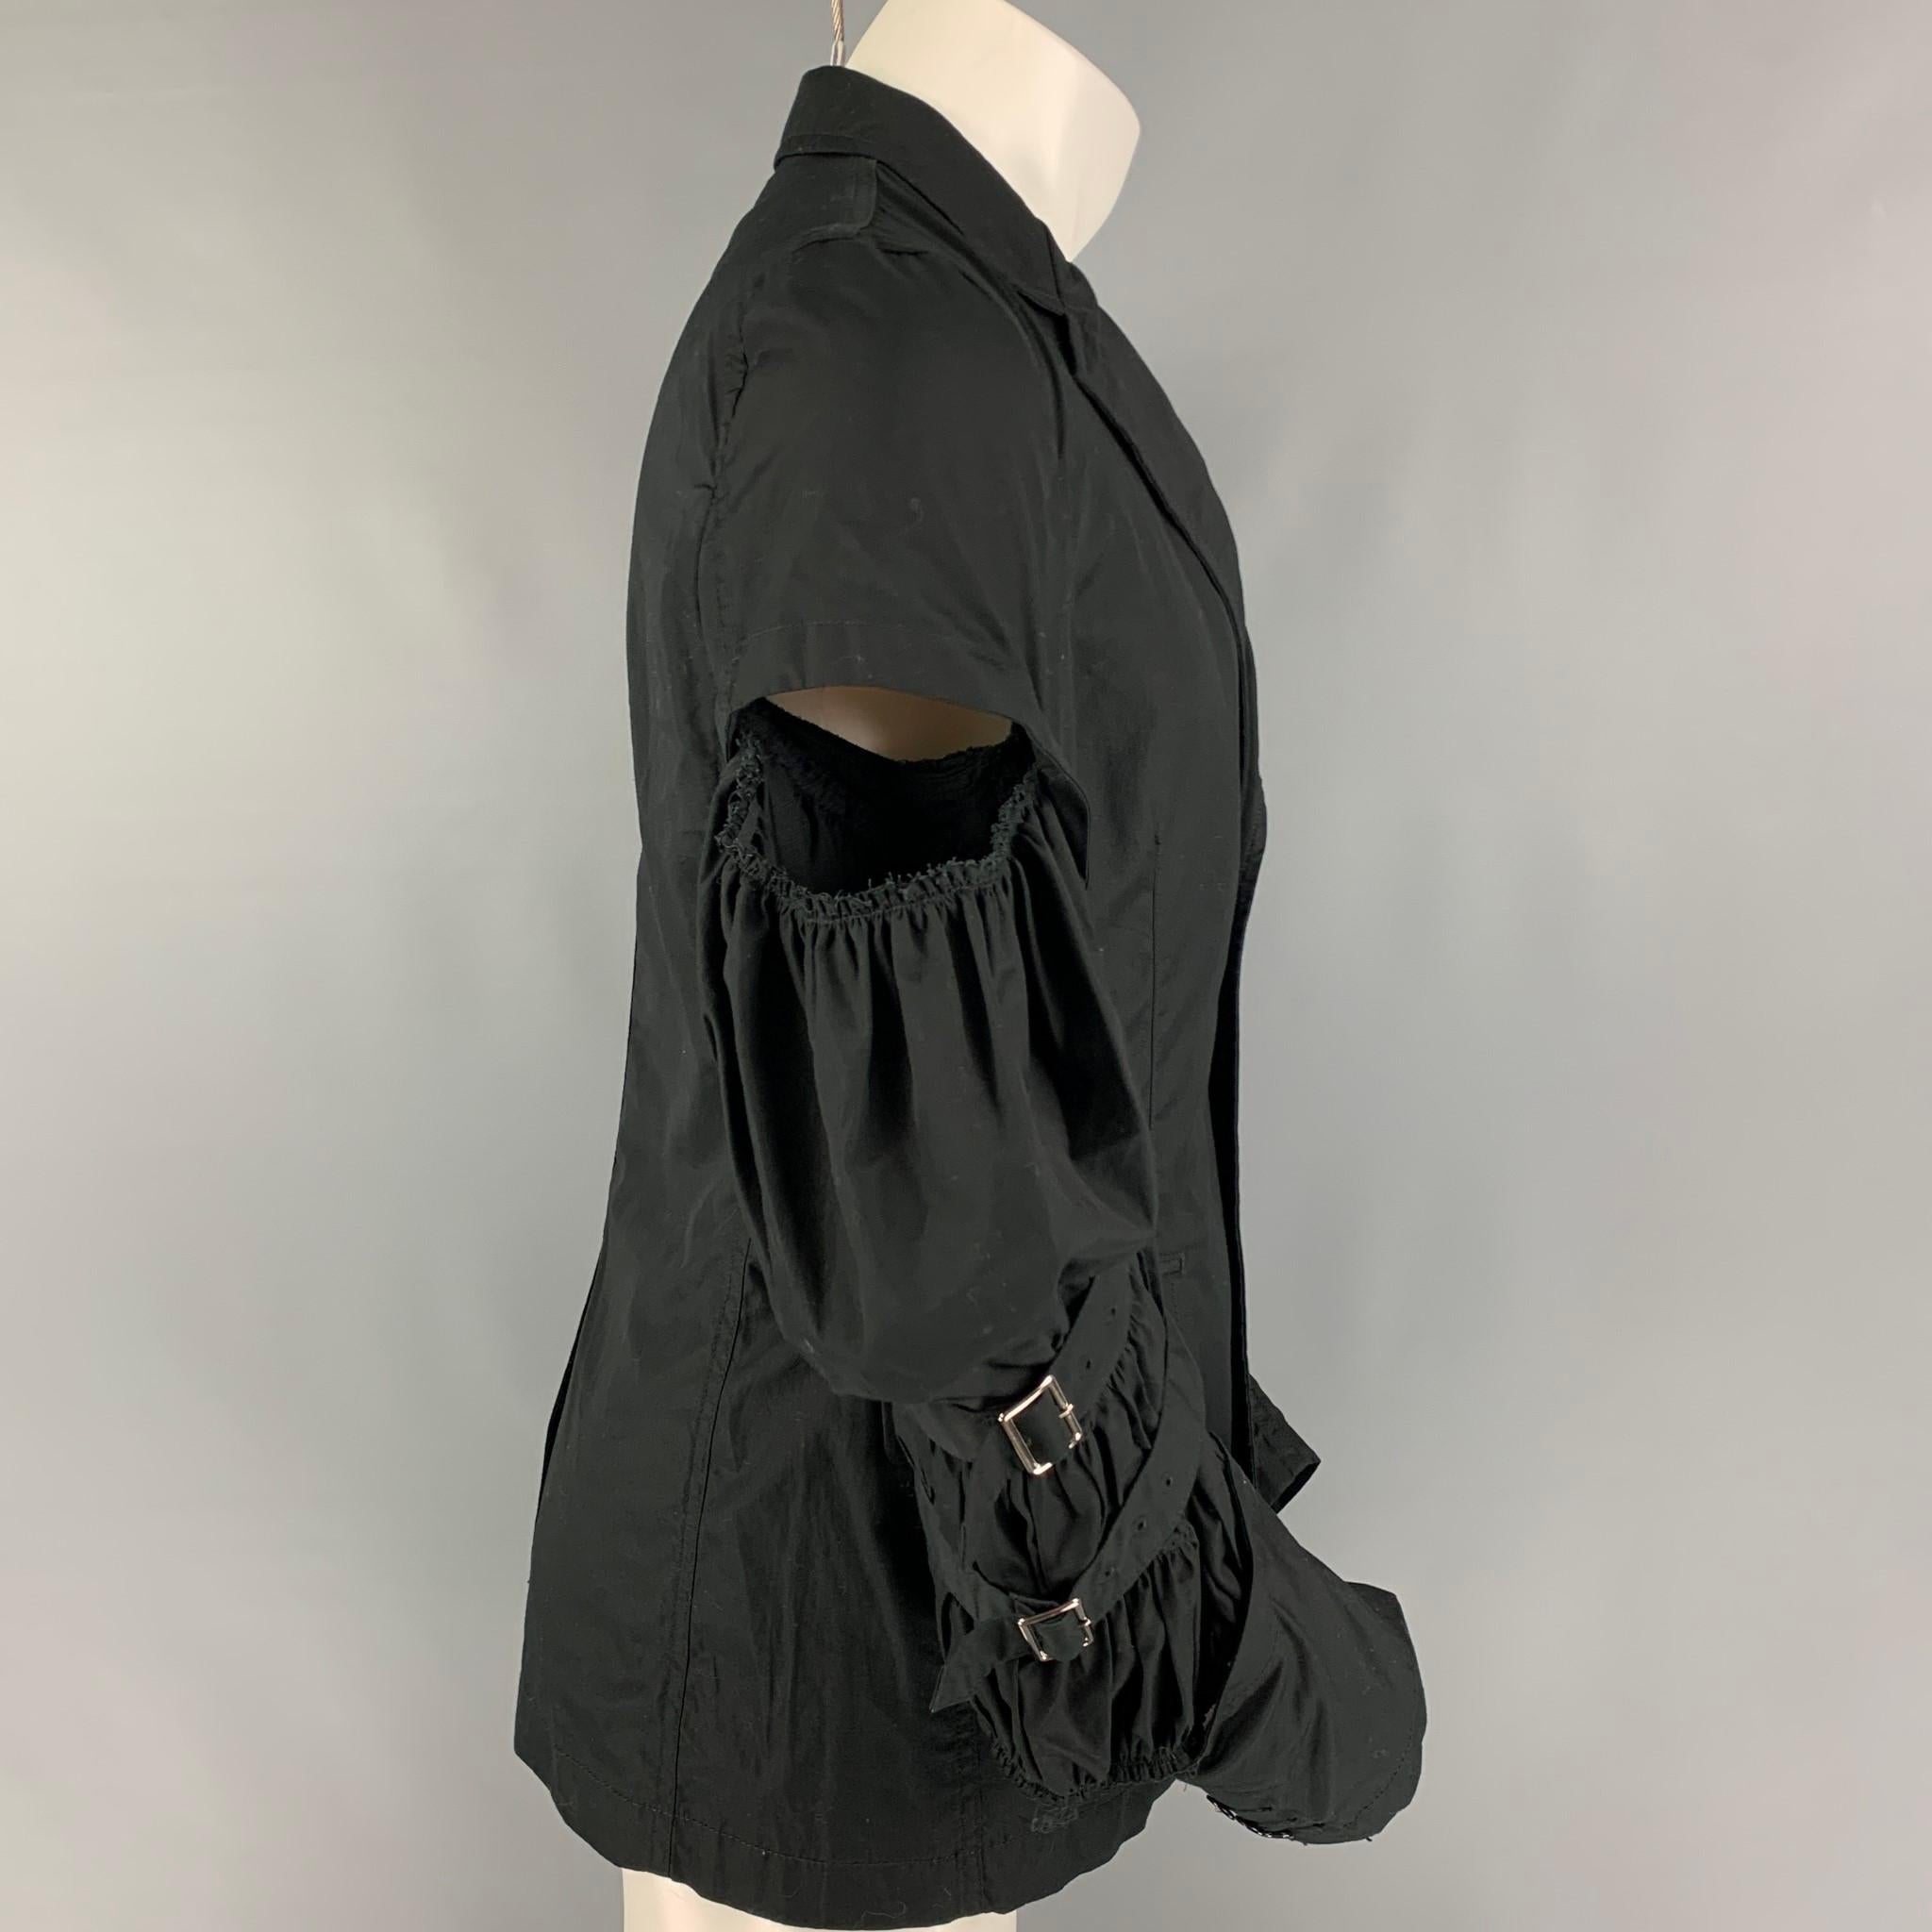 COMME des GARCONS HOMME PLUS jacket comes in a black cotton featuring a notch lapel, flap pockets, single back vent, cut out design, pleated details, buckle straps, and a double button closure. Made in Japan. 

Very Good Pre-Owned Condition.
Marked: